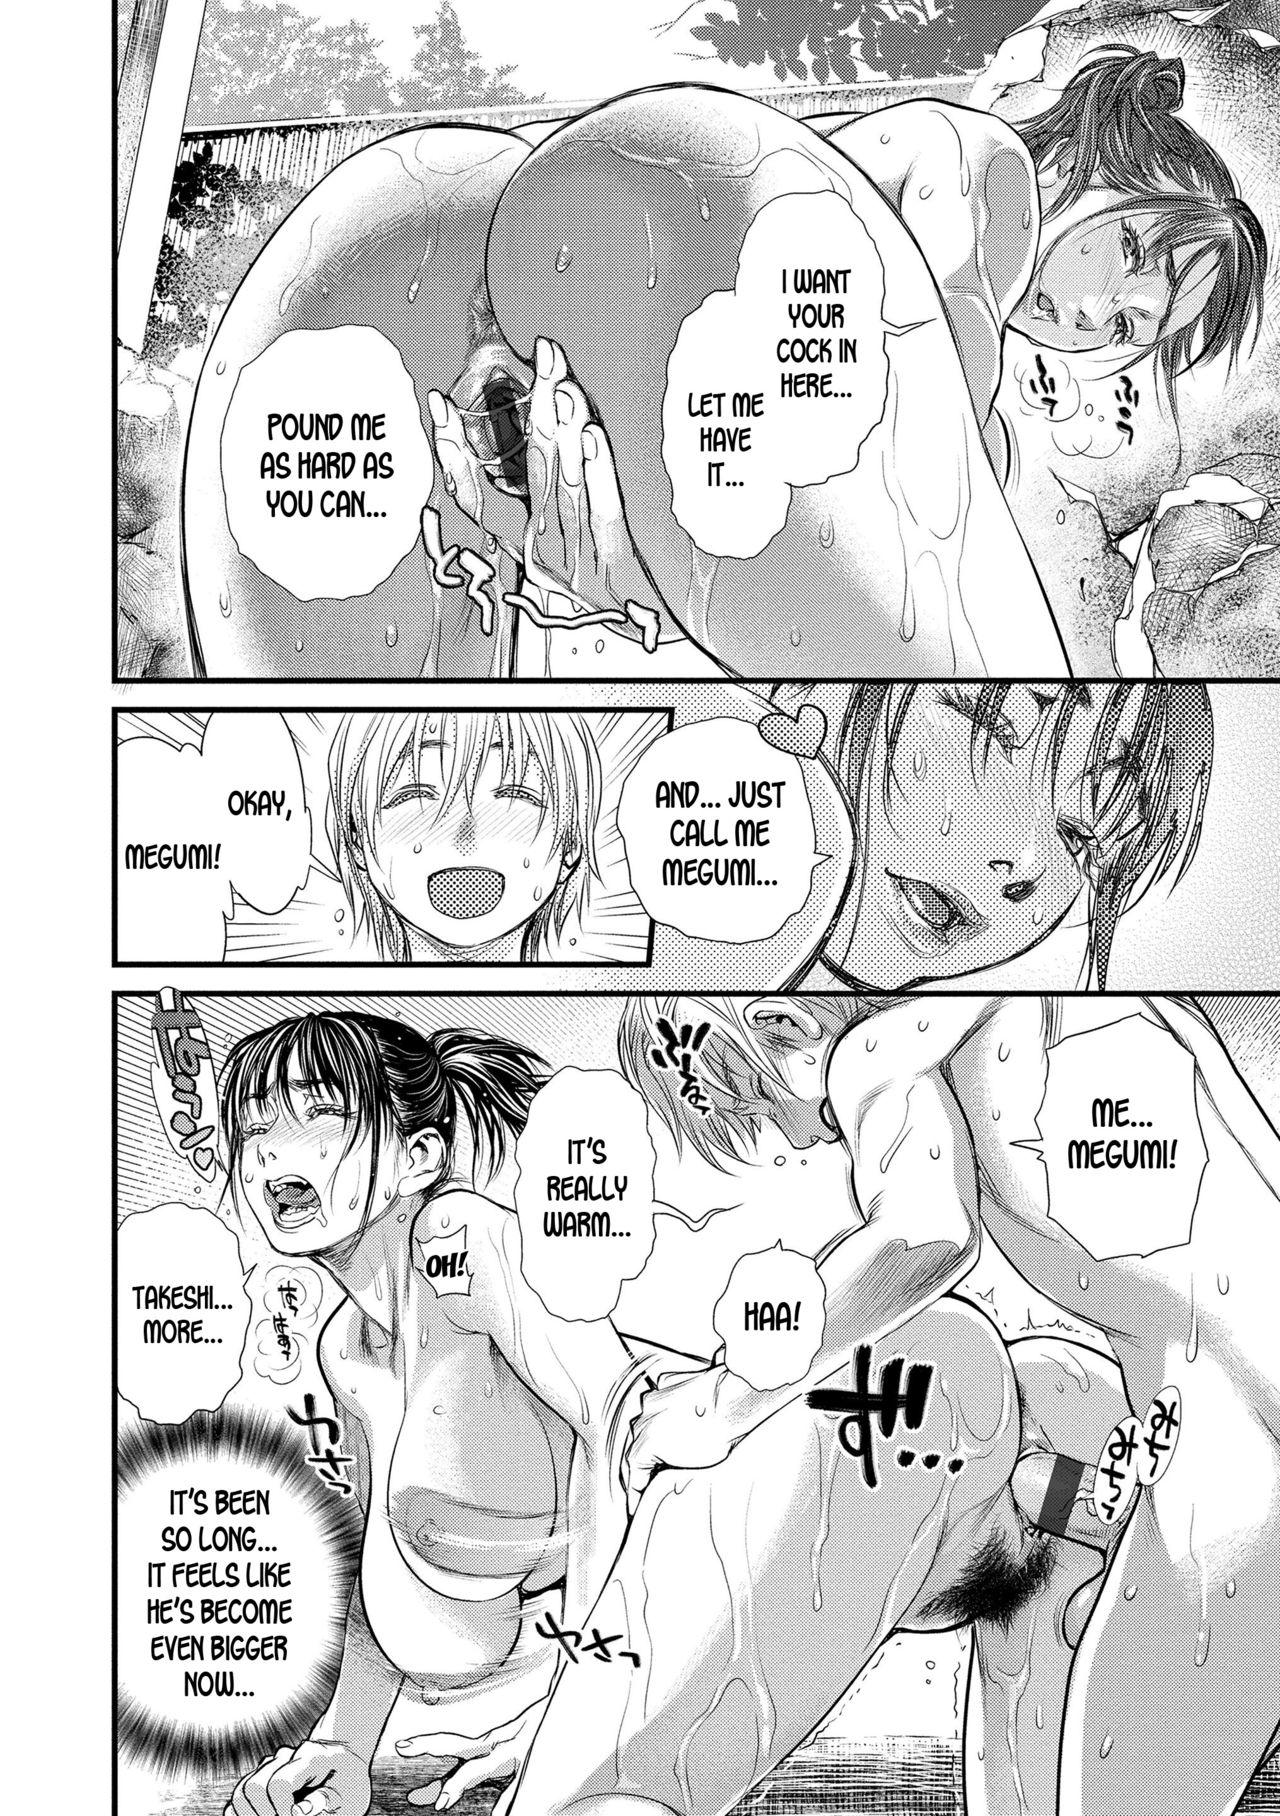 Boku to Itoko no Onee-san to | Together With My Older Cousin Ch. 3 12